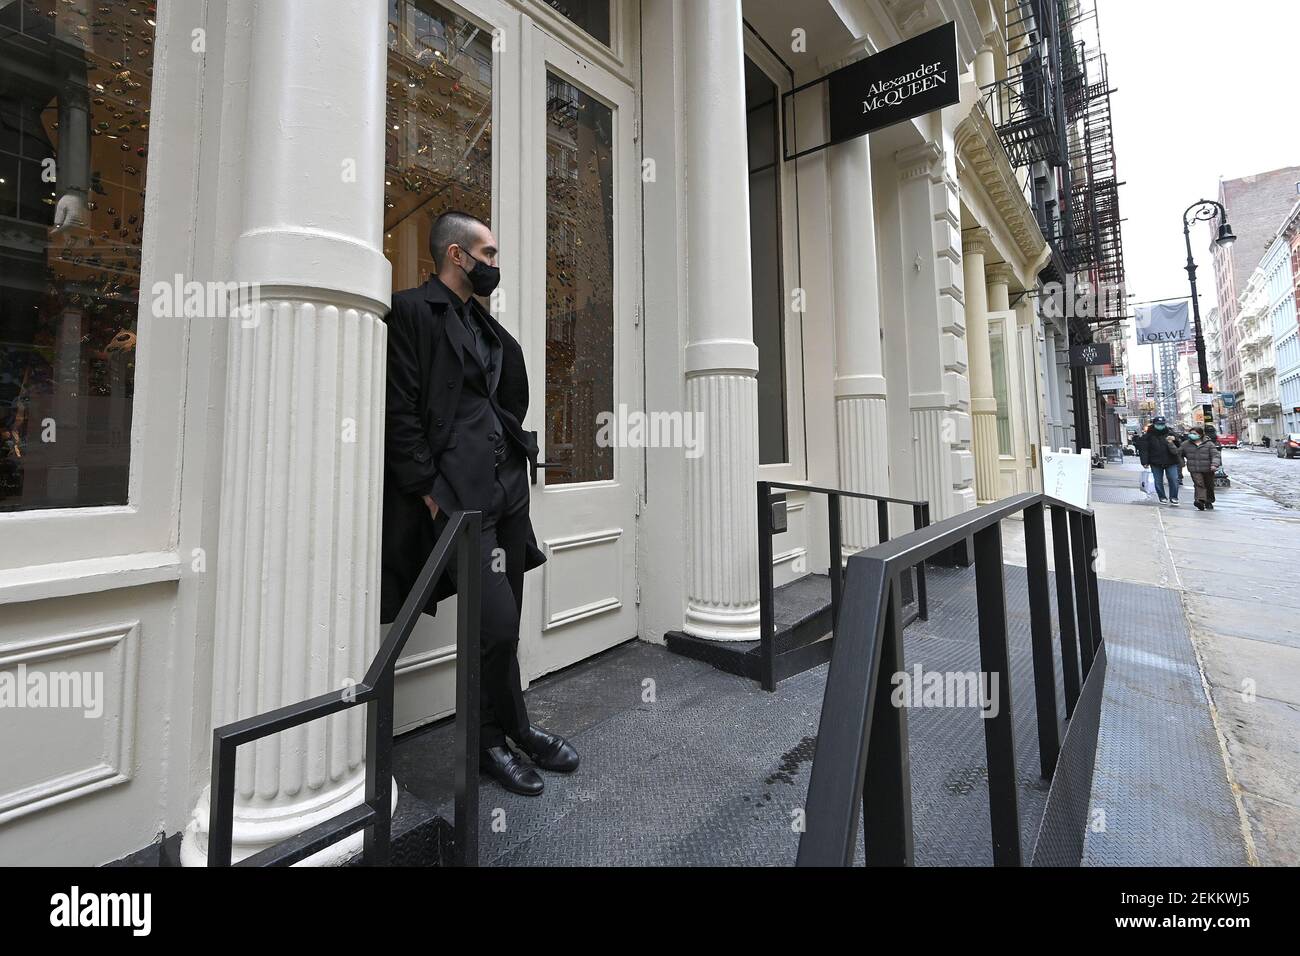 New York, USA. 23rd Feb, 2021. A security guard stands outside of